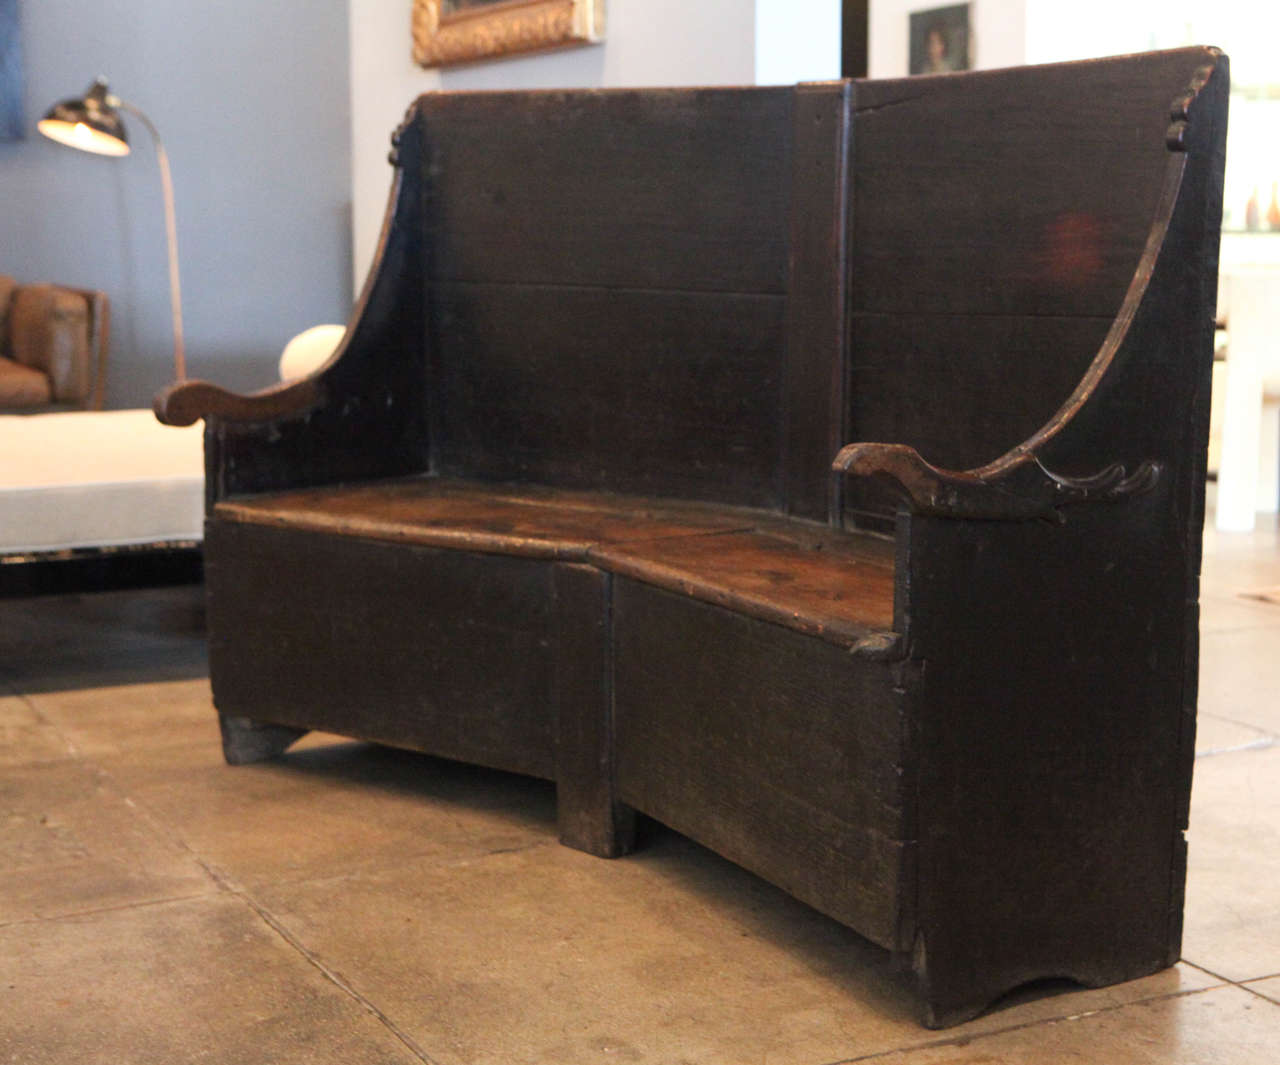 A beautiful ebonized walnut bench from the early 18th century with storage under each seat.